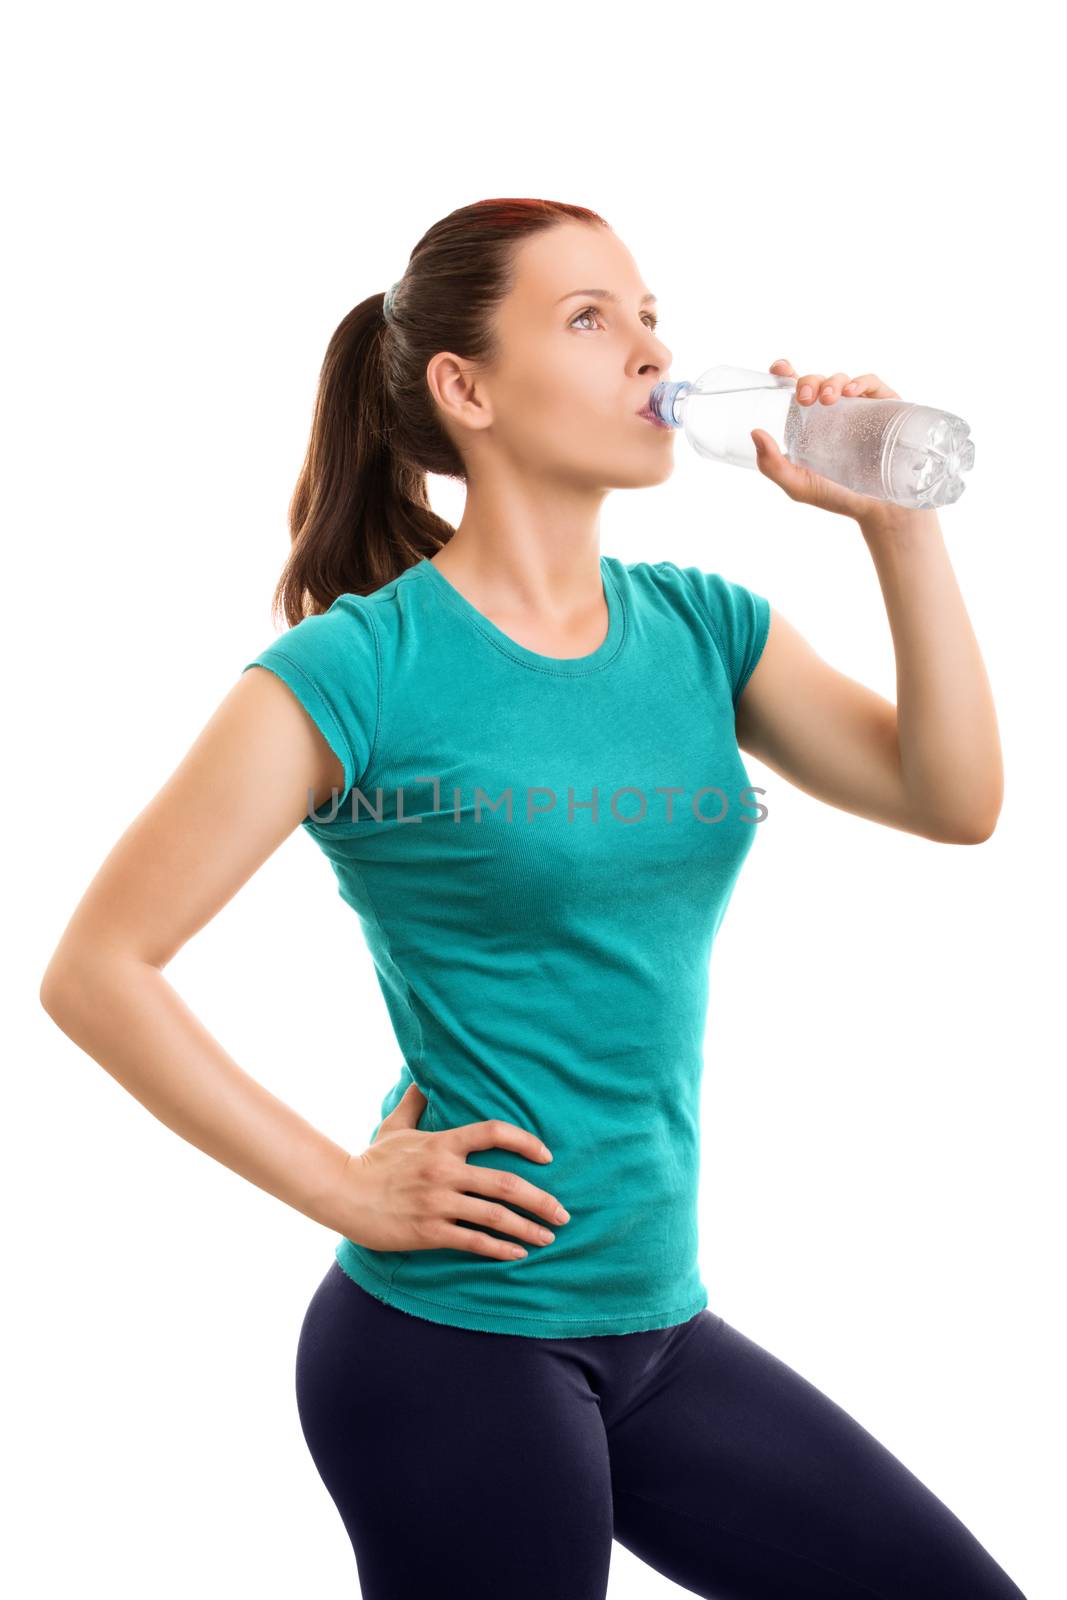 Keep yourself well hydrated while exercising. Beautiful young girl drinking water after her workout, isolated on white background.